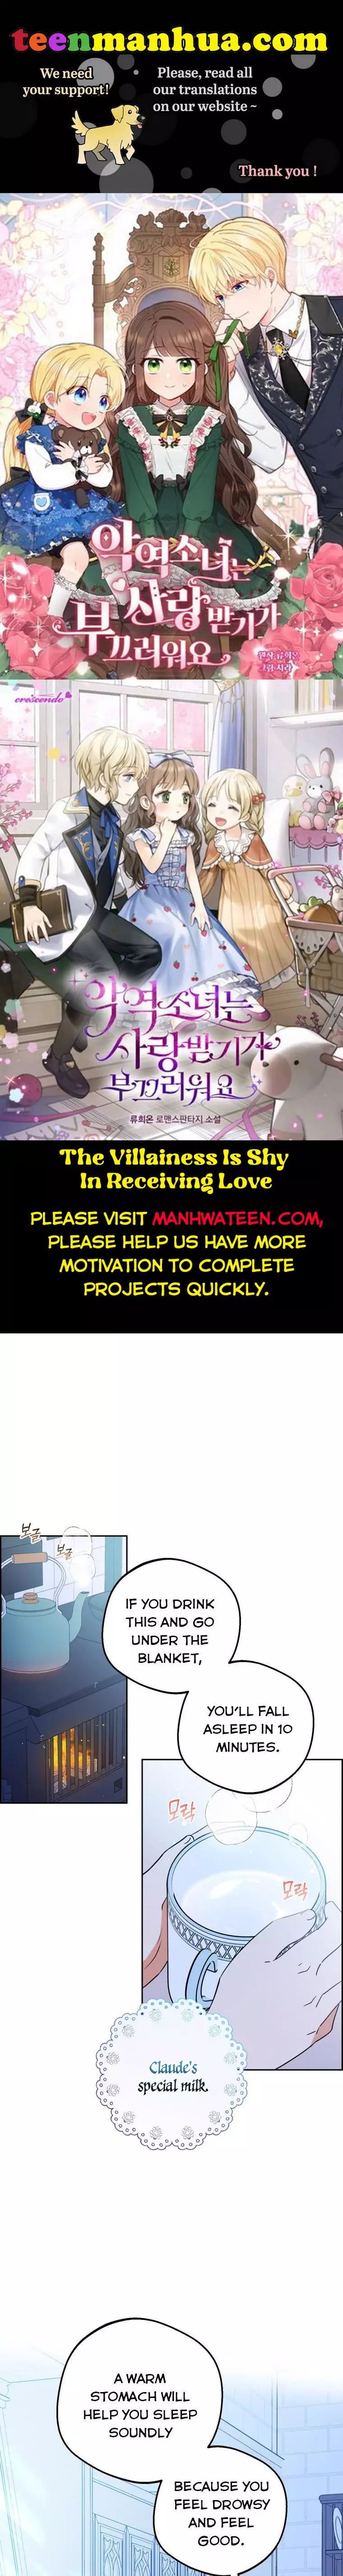 The Villainess Is Shy In Receiving Love - 19 page 1-674644e9